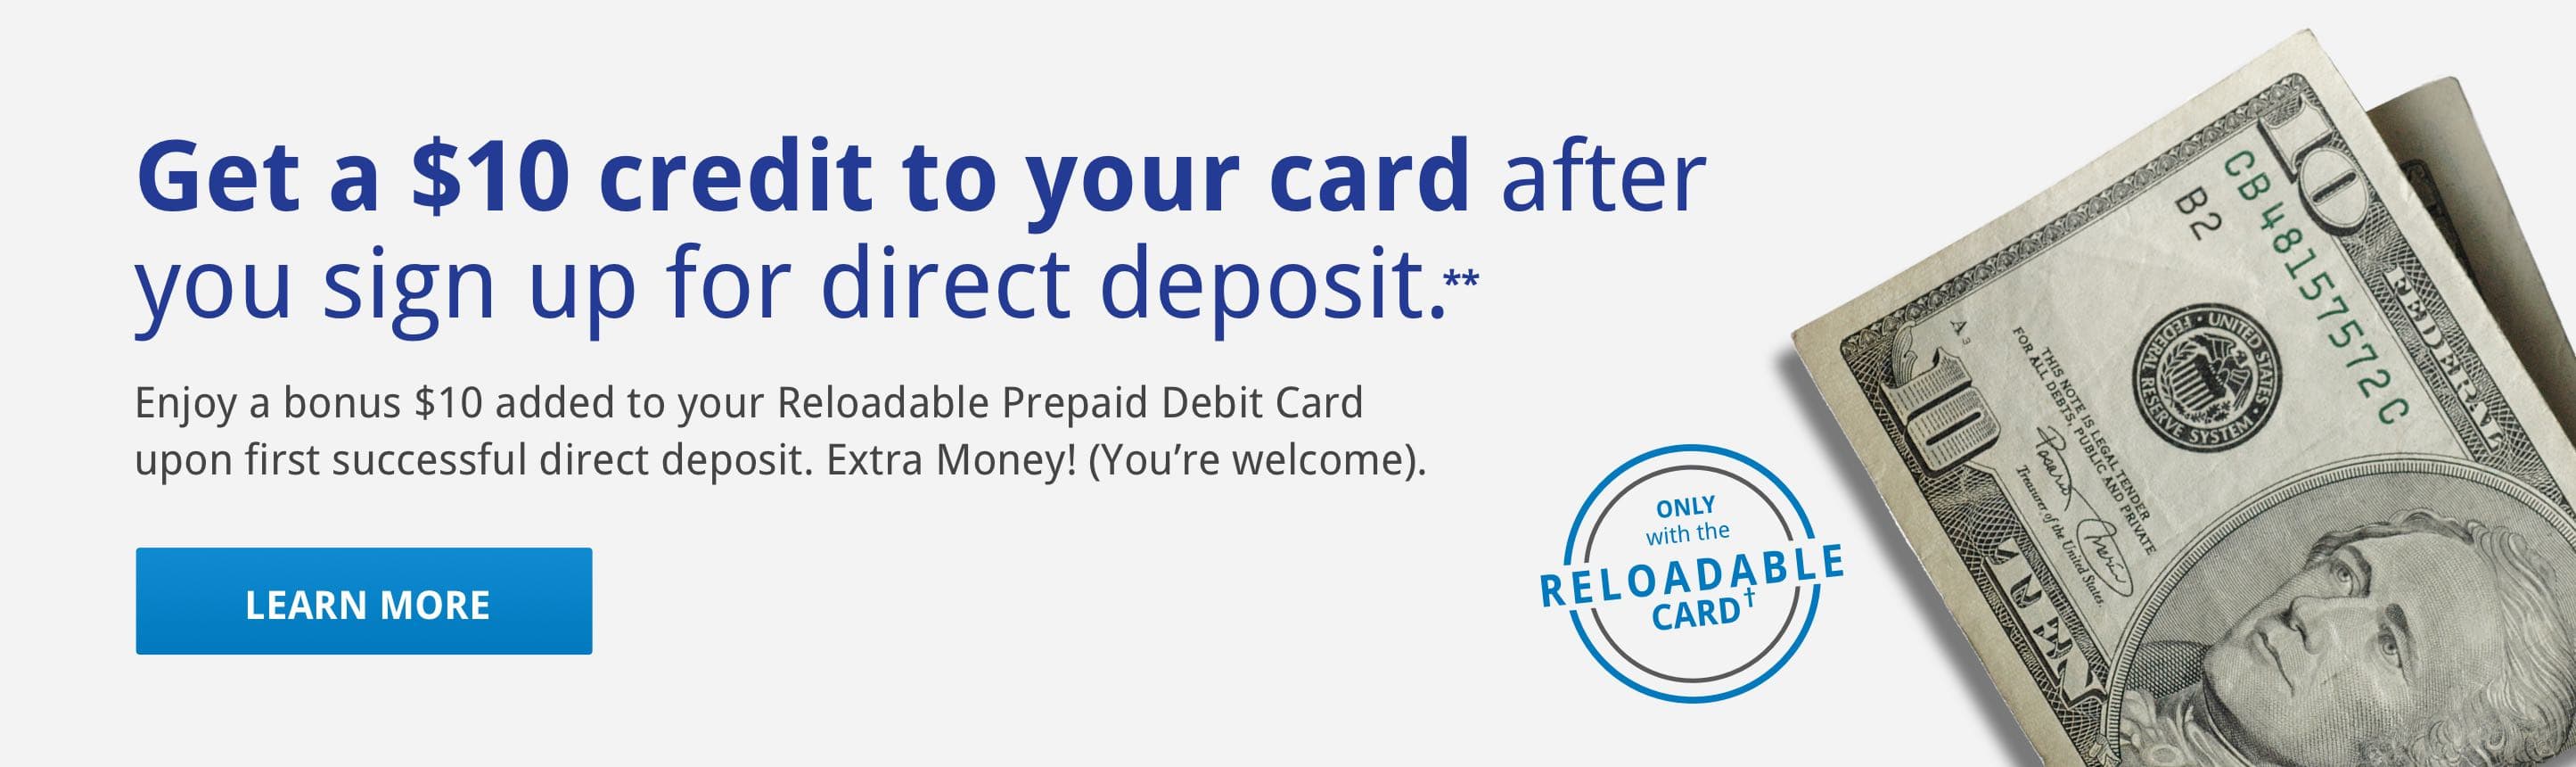 Get a $10 credit to your card after you sign up for direct deposit